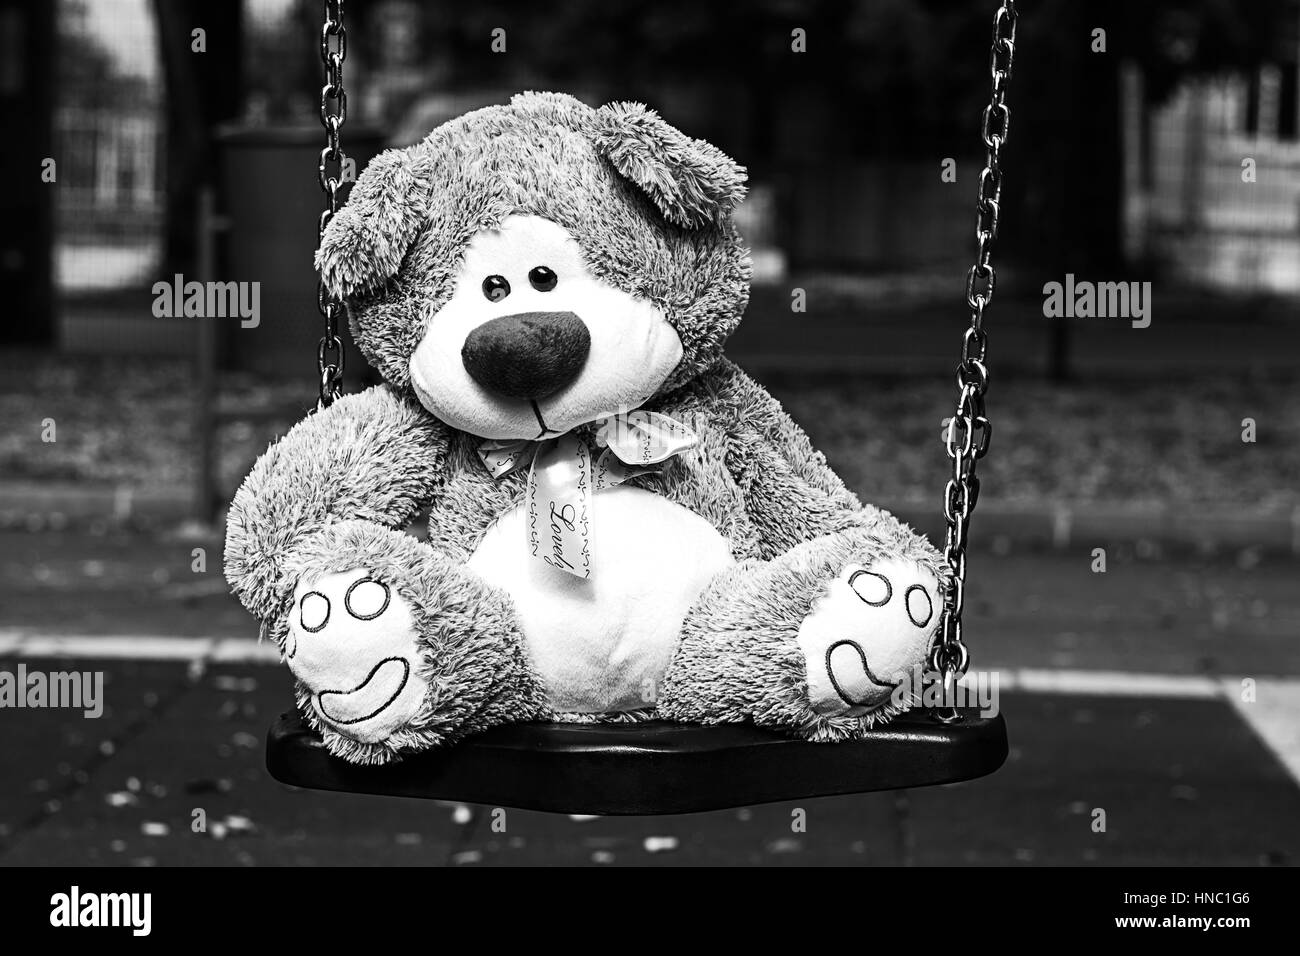 Depressed Fluffy Soft Teddy Bear Toy sitting on cradle in the park Stock Photo